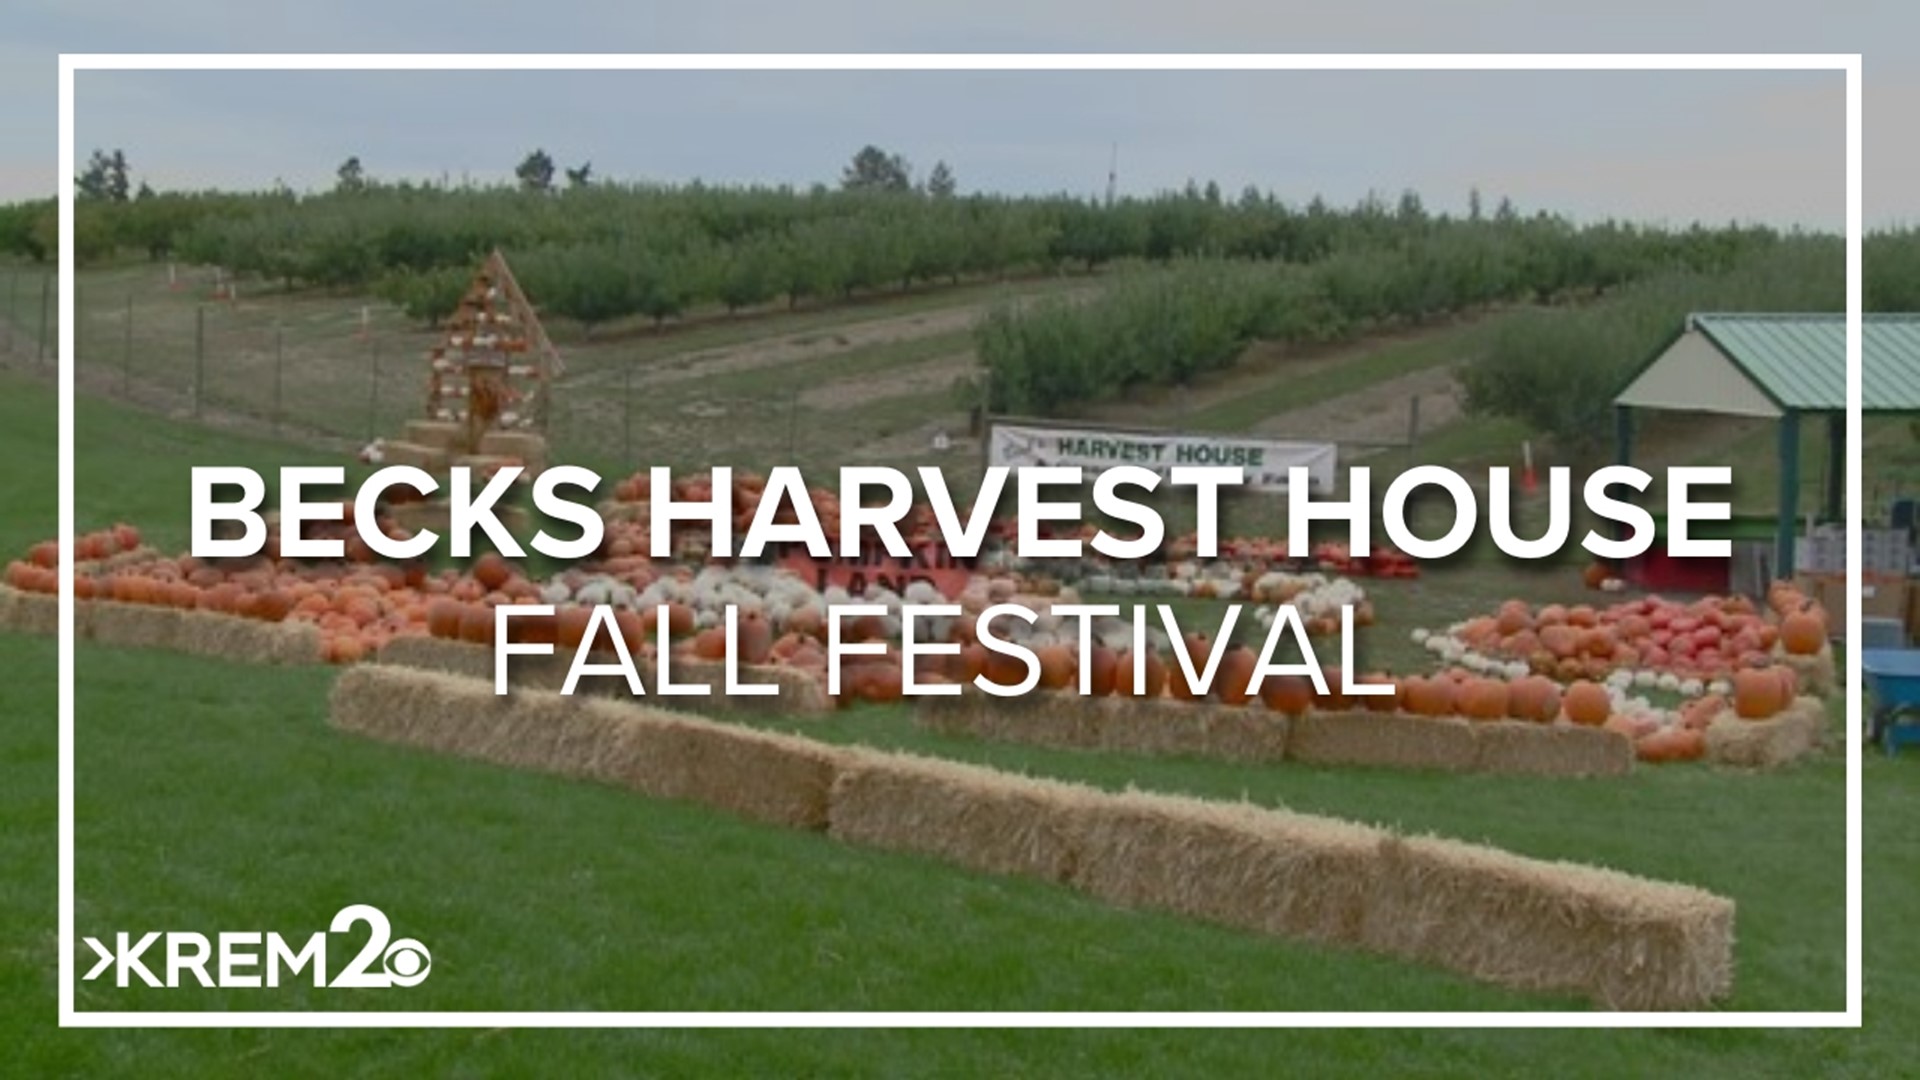 Families can head out to Green Bluff and wander through a corn maze, find the perfect pumpkin, eat some tasty pumpkin pie or enjoy food from food trucks.